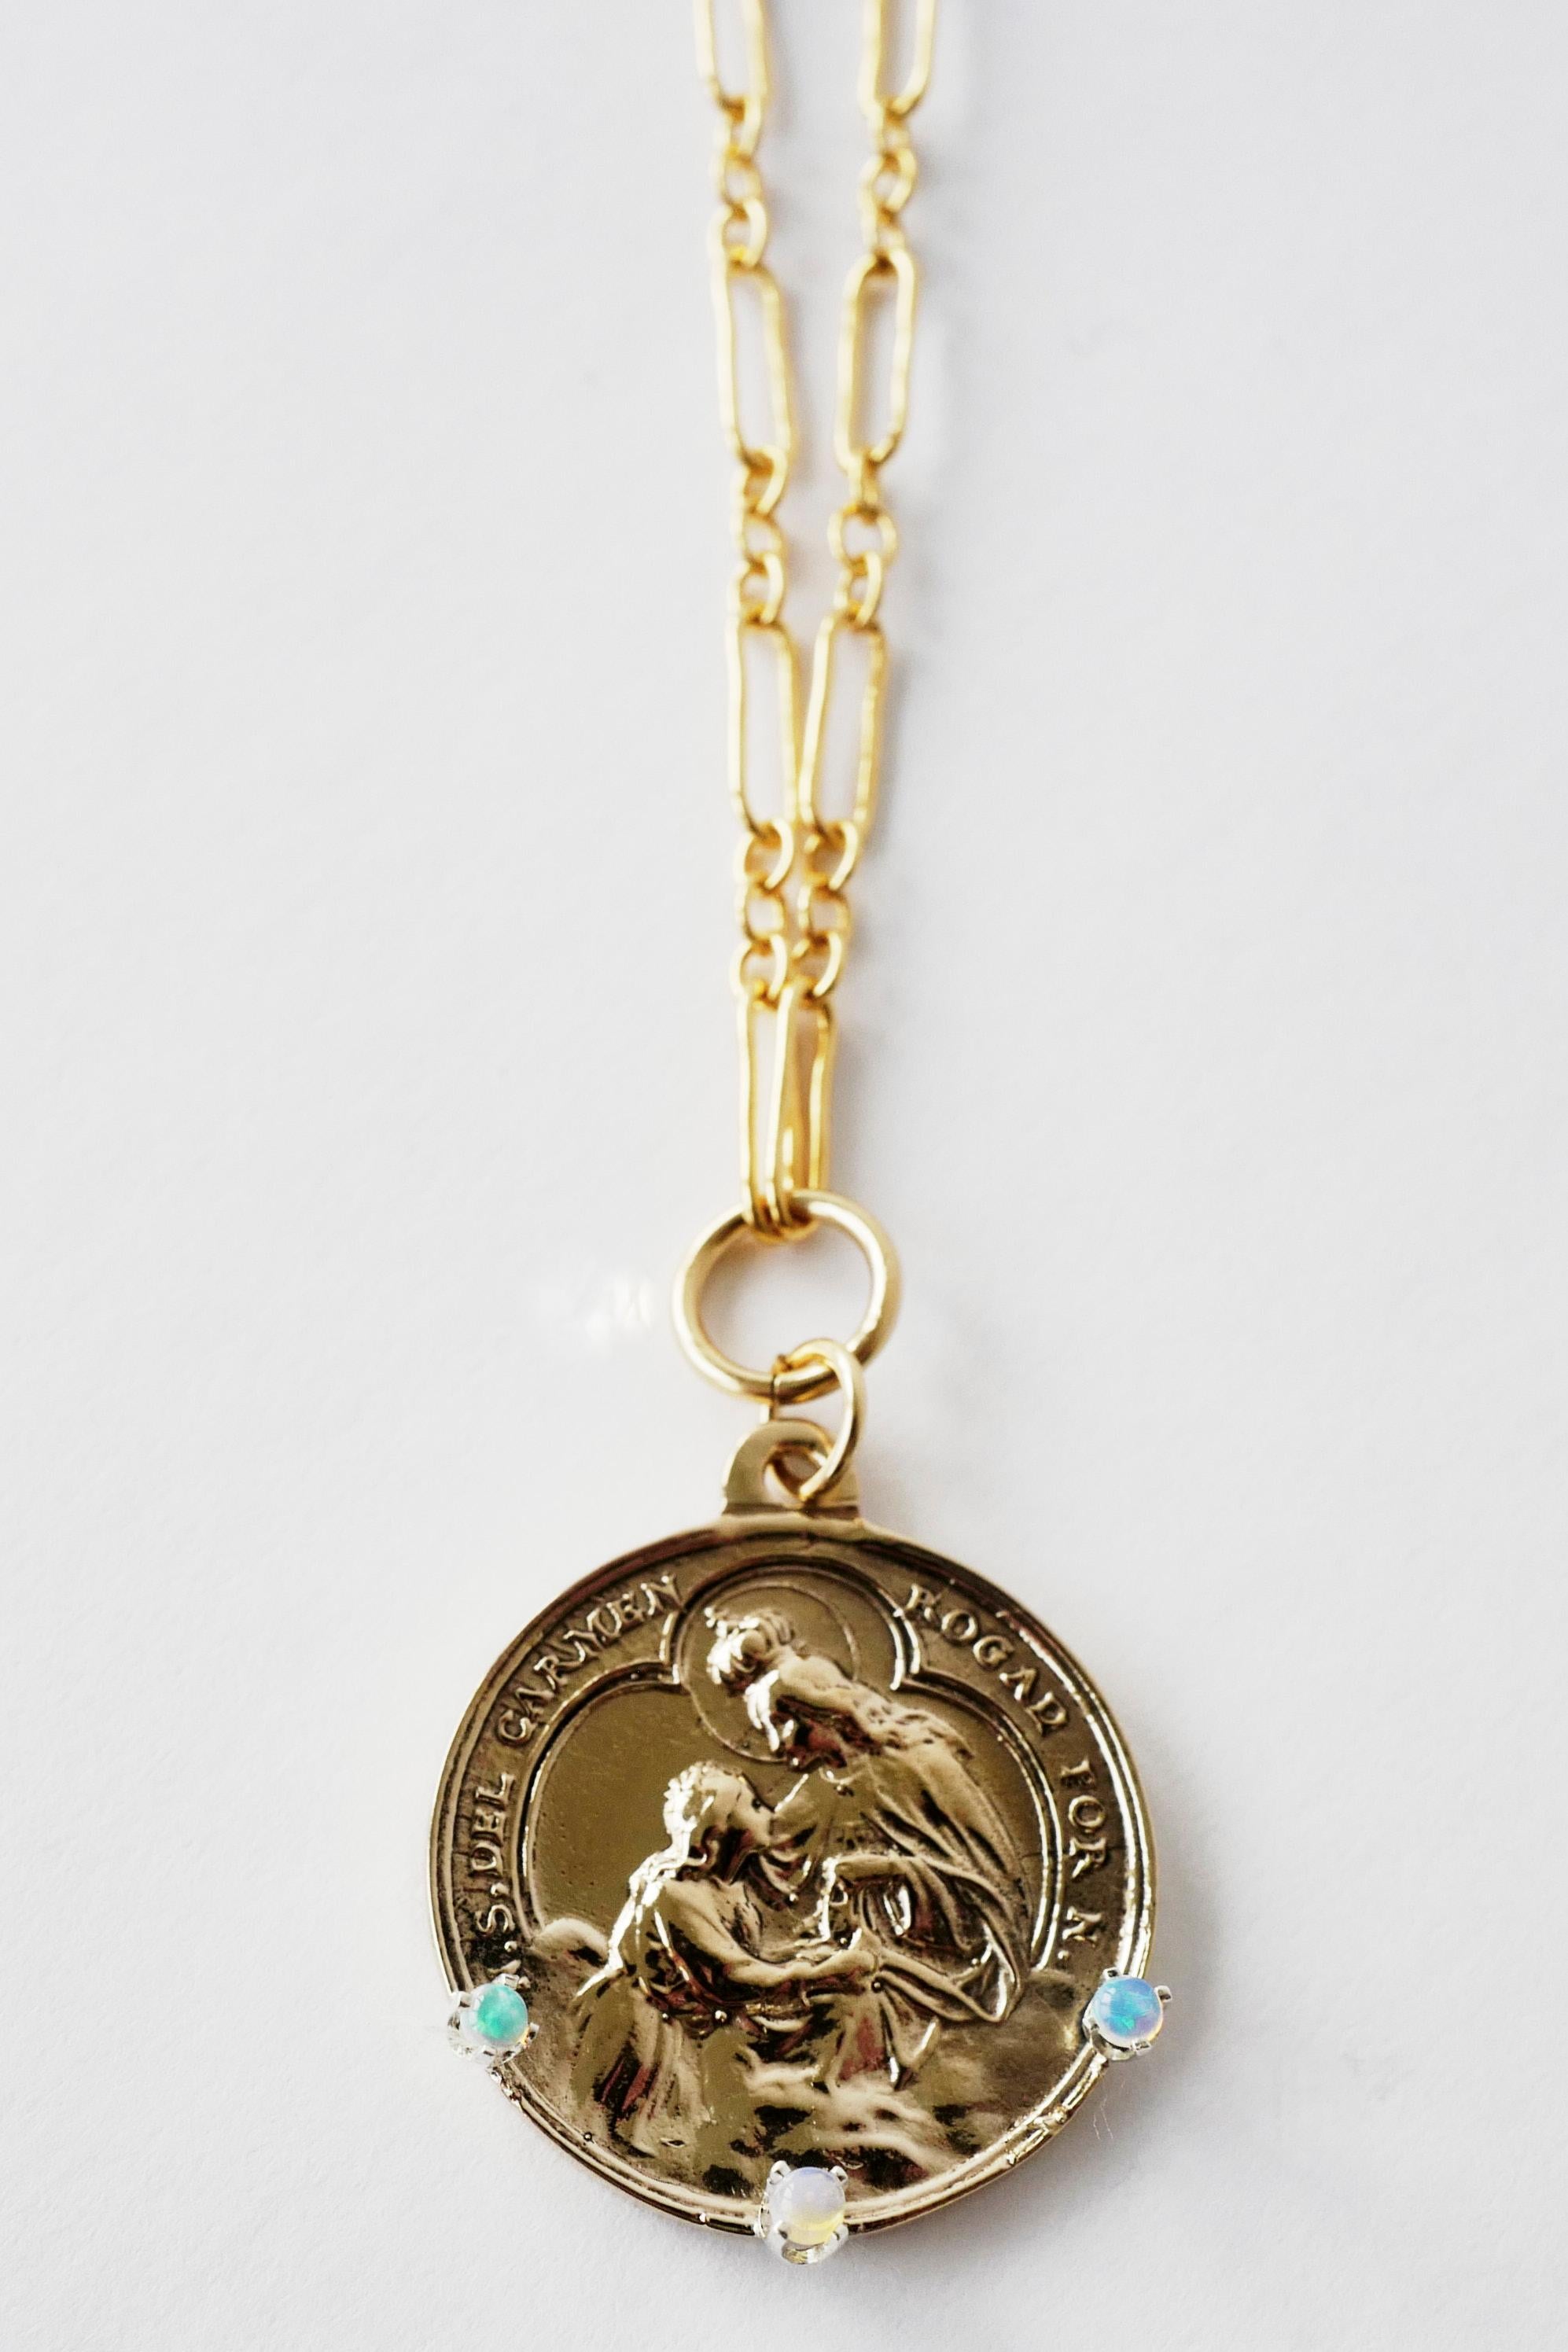 Virgin Mary Medal Chain Necklace Opal Pendant J Dauphin For Sale 3